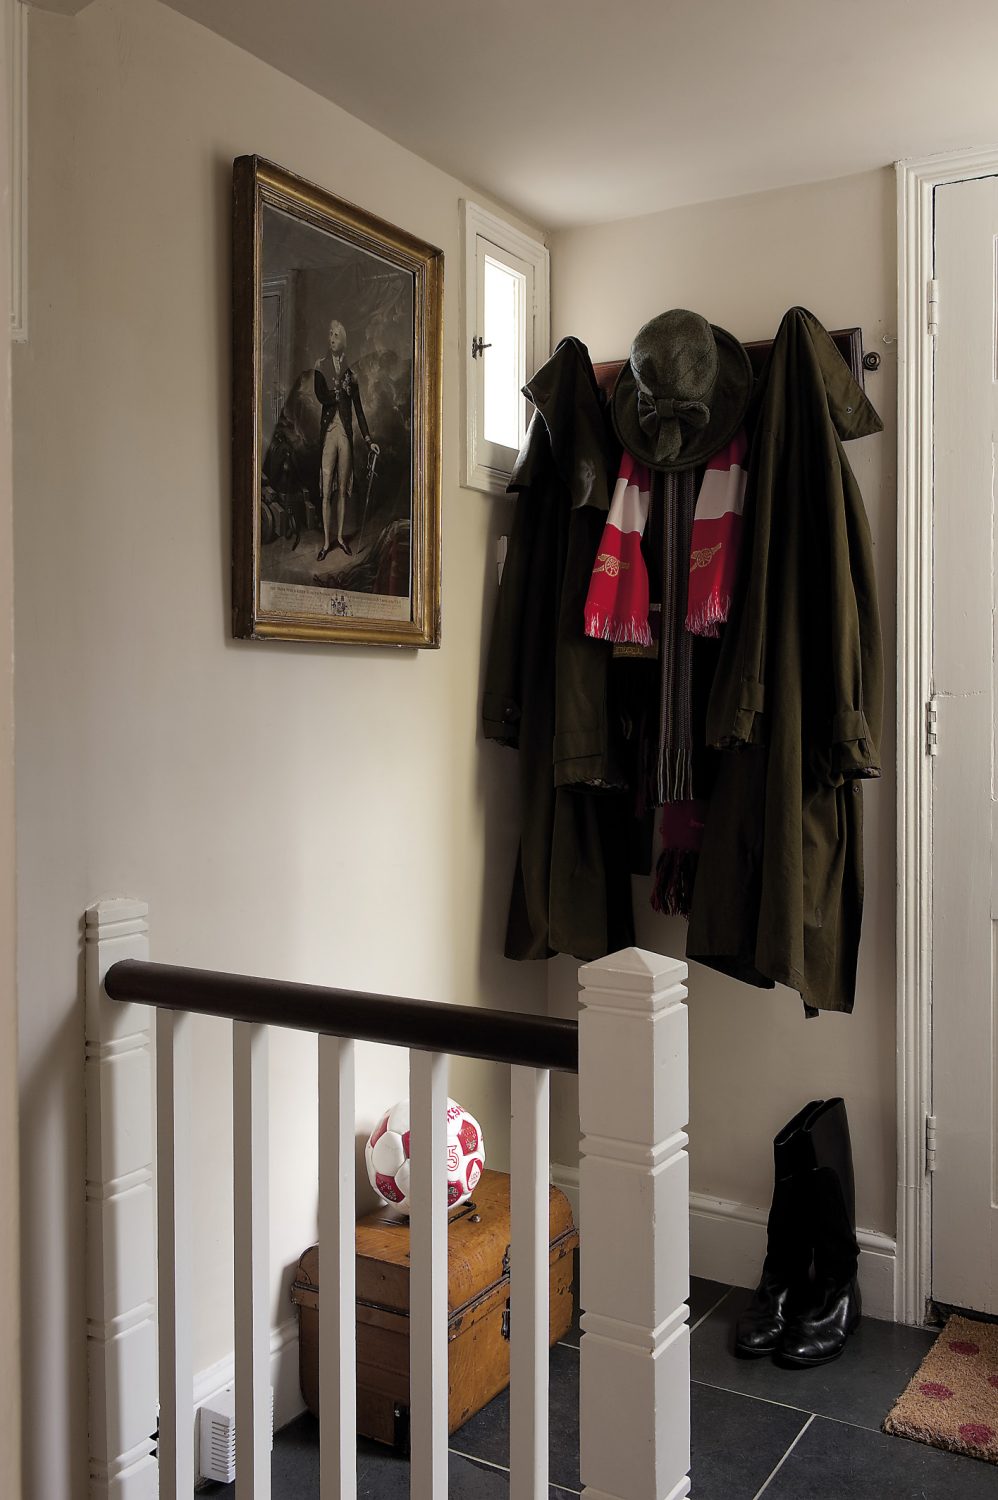 On entering through the front door, you arrive on the first floor of the house’s five levels